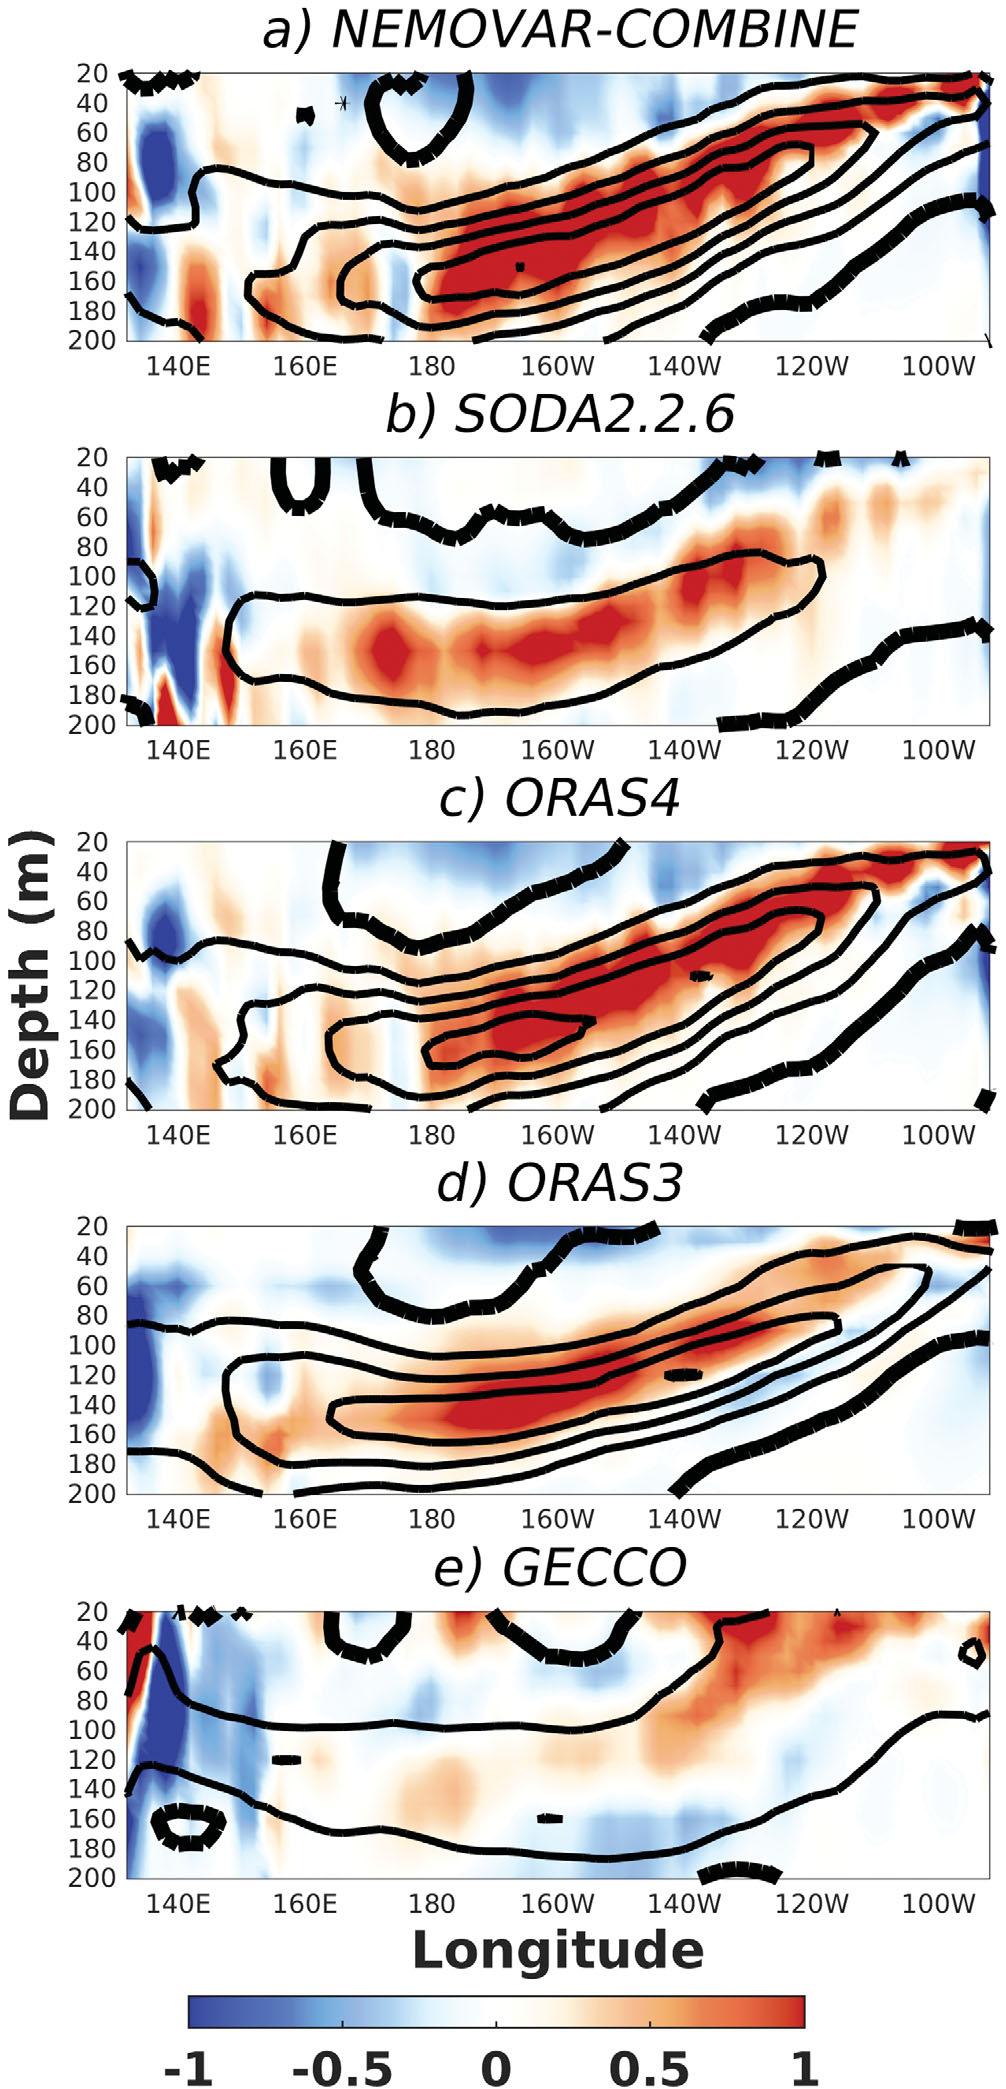 The latitudinal heat advection structure is illustrated in the meridional transect in the central Pacific shown in Figure 15.